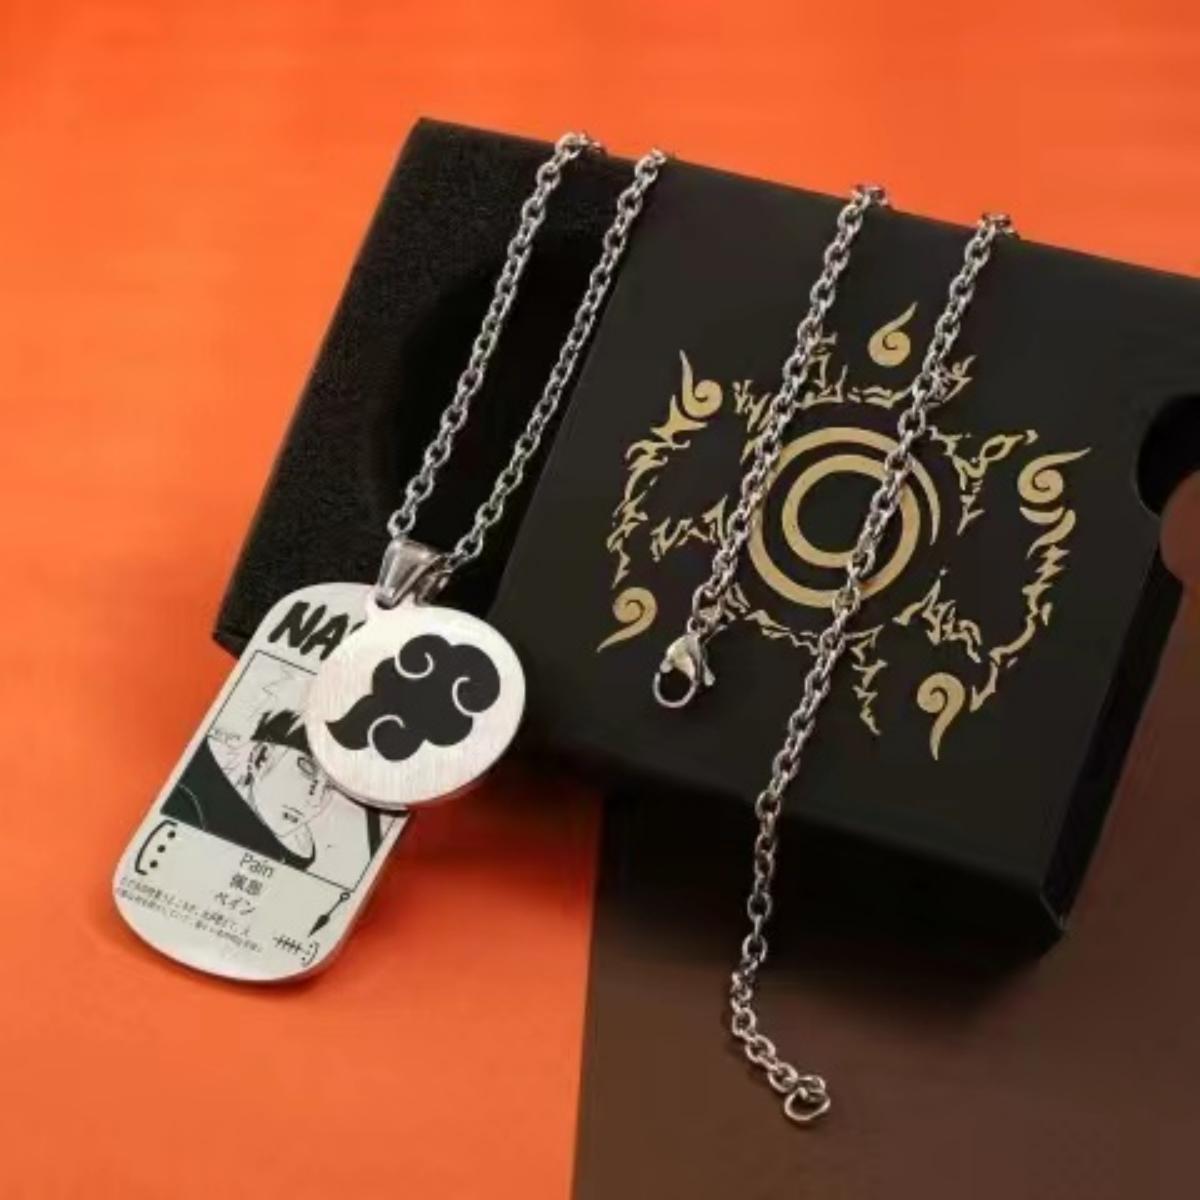 Ninja style cool military tag necklace, highlight the personal temperament.